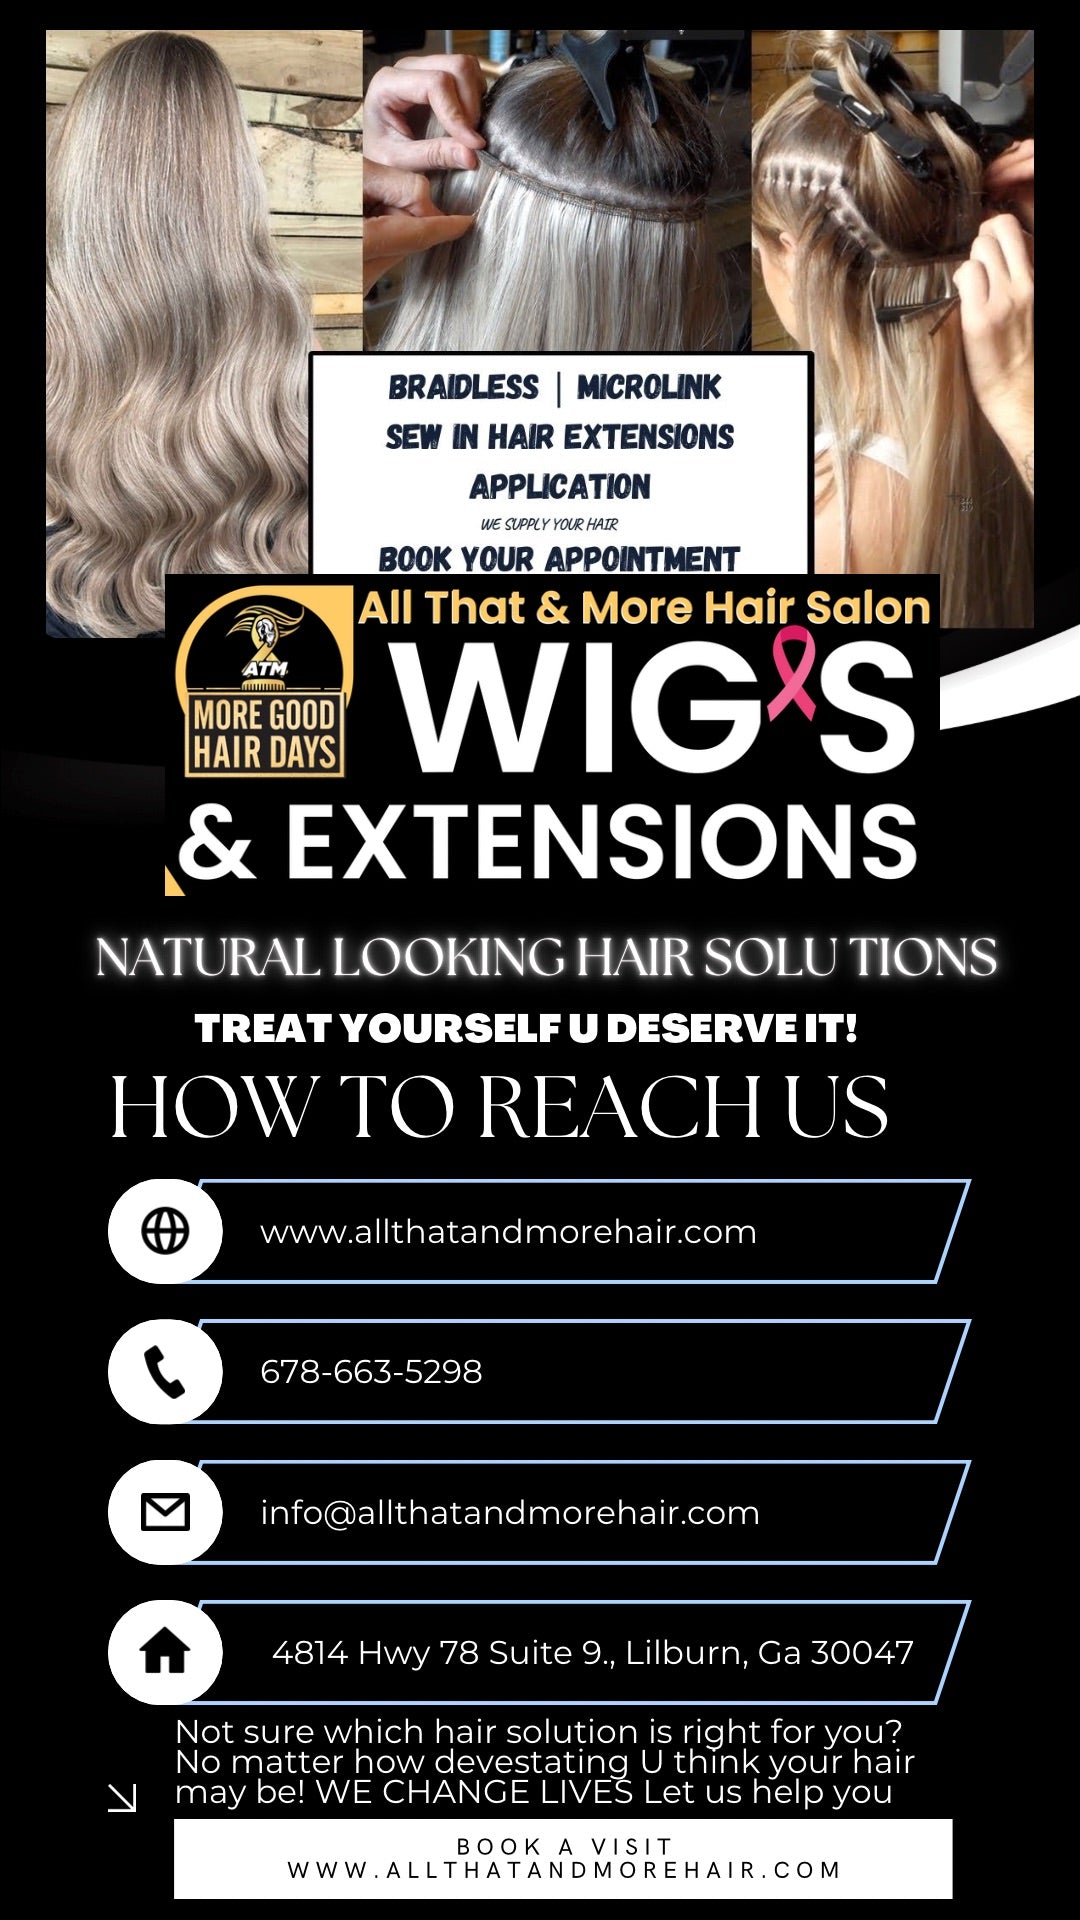 Schedule Your Personal Consultation for the Ideal Hair Extension